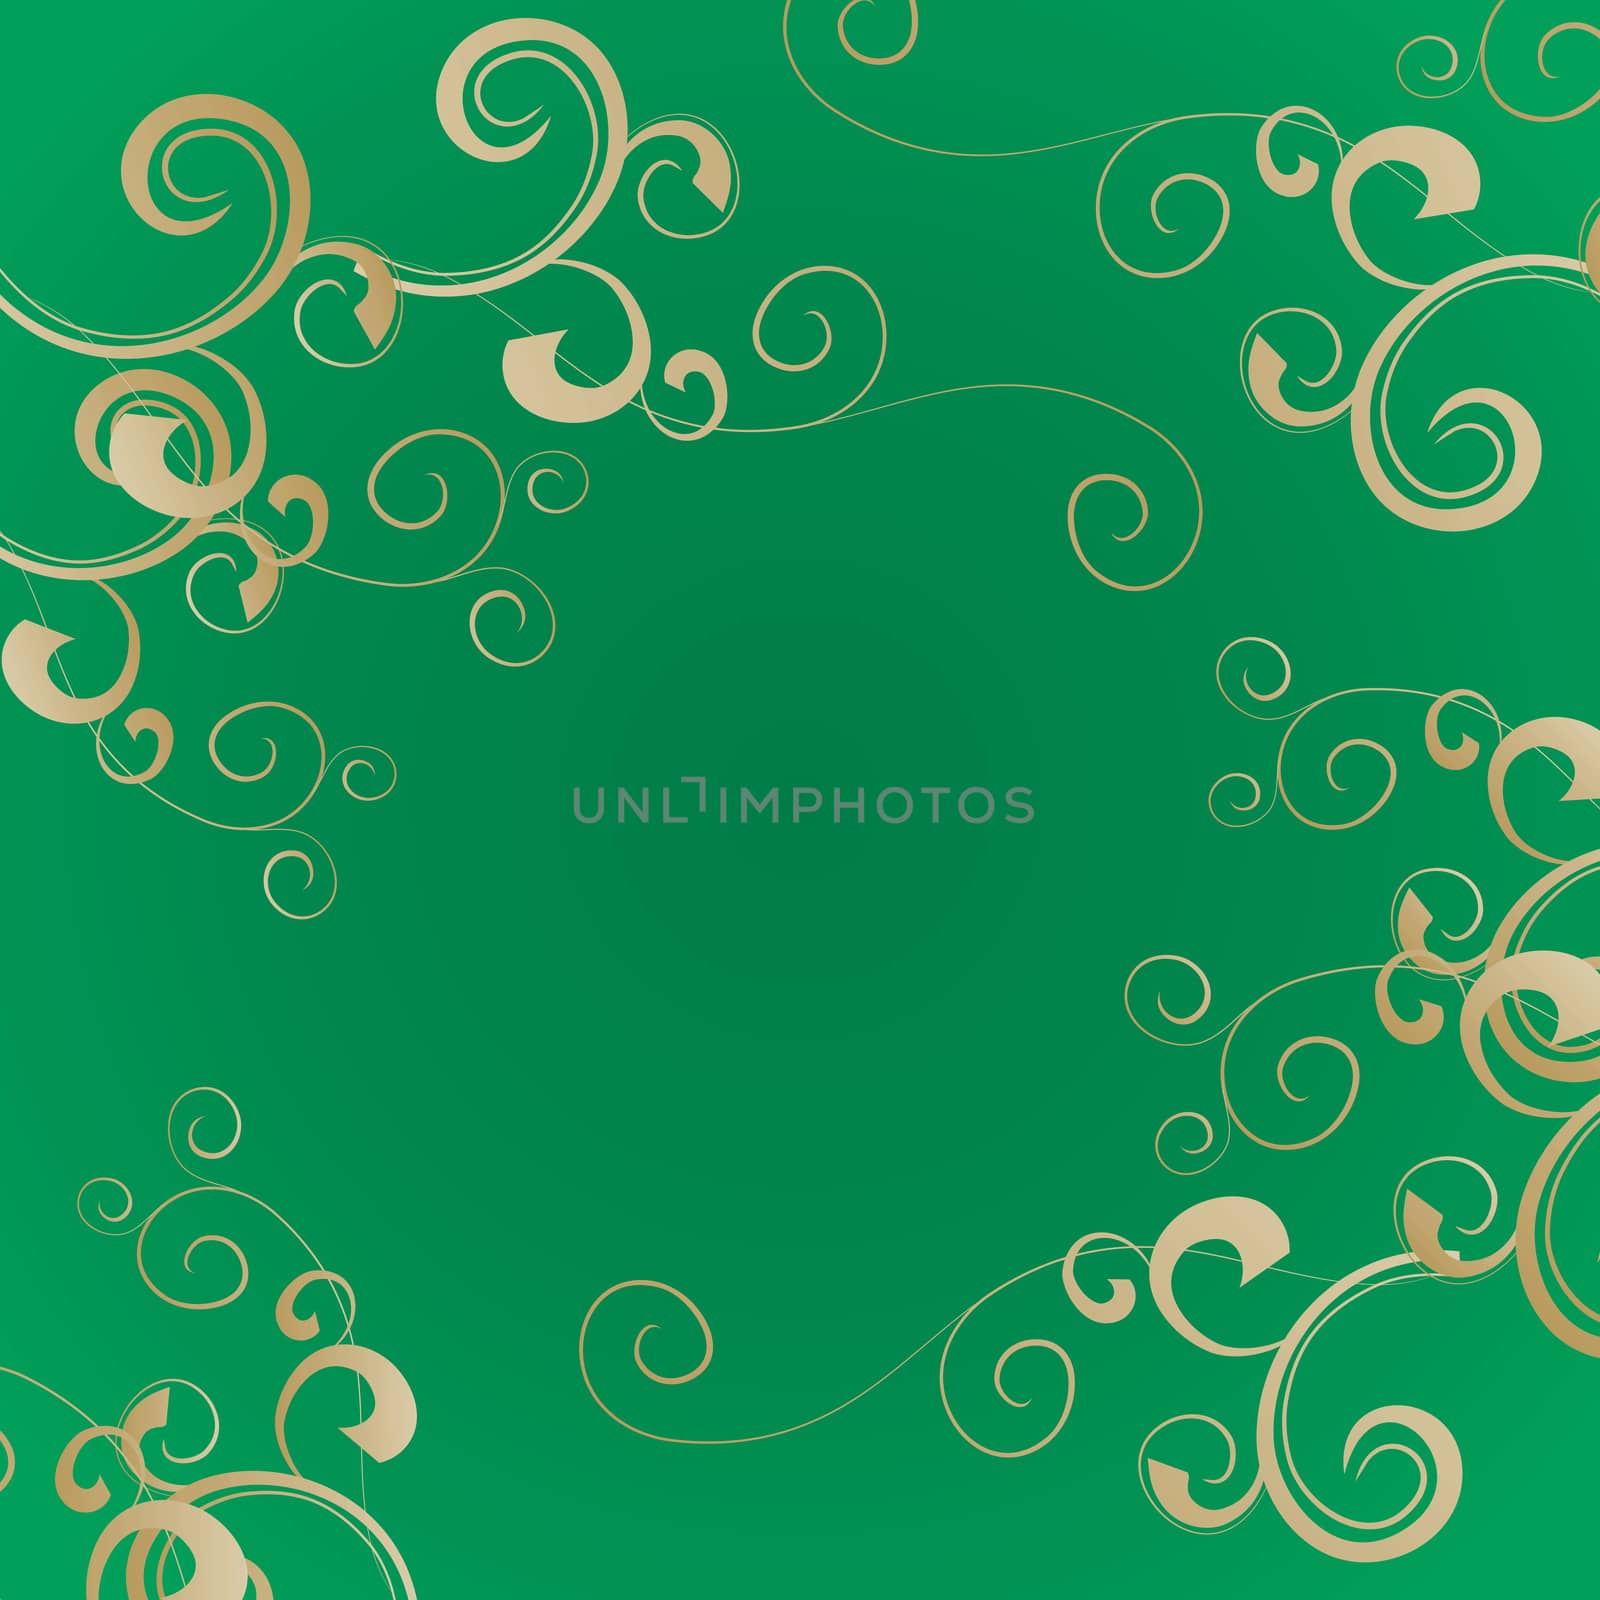 green flourishes background vector by CherJu